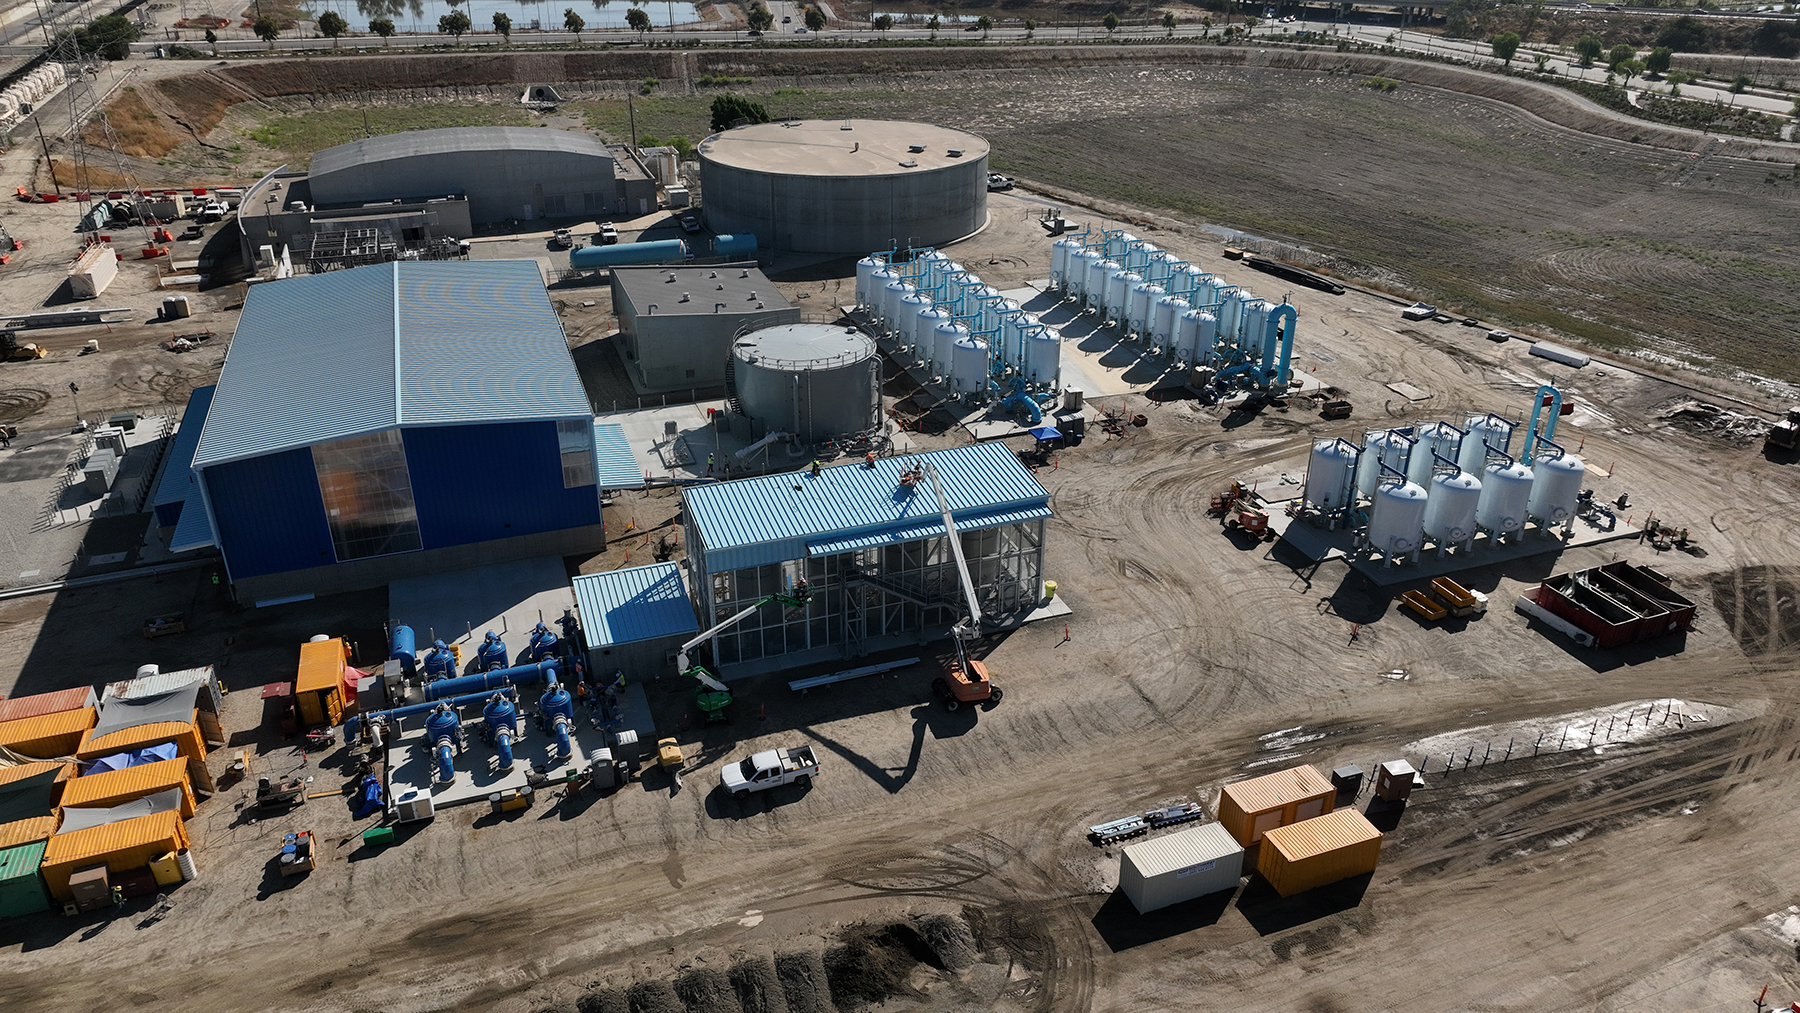 The Tujunga Well Field Response Action groundwater treatment facility under construction in Los Angeles. (Image courtesy of Stantec)